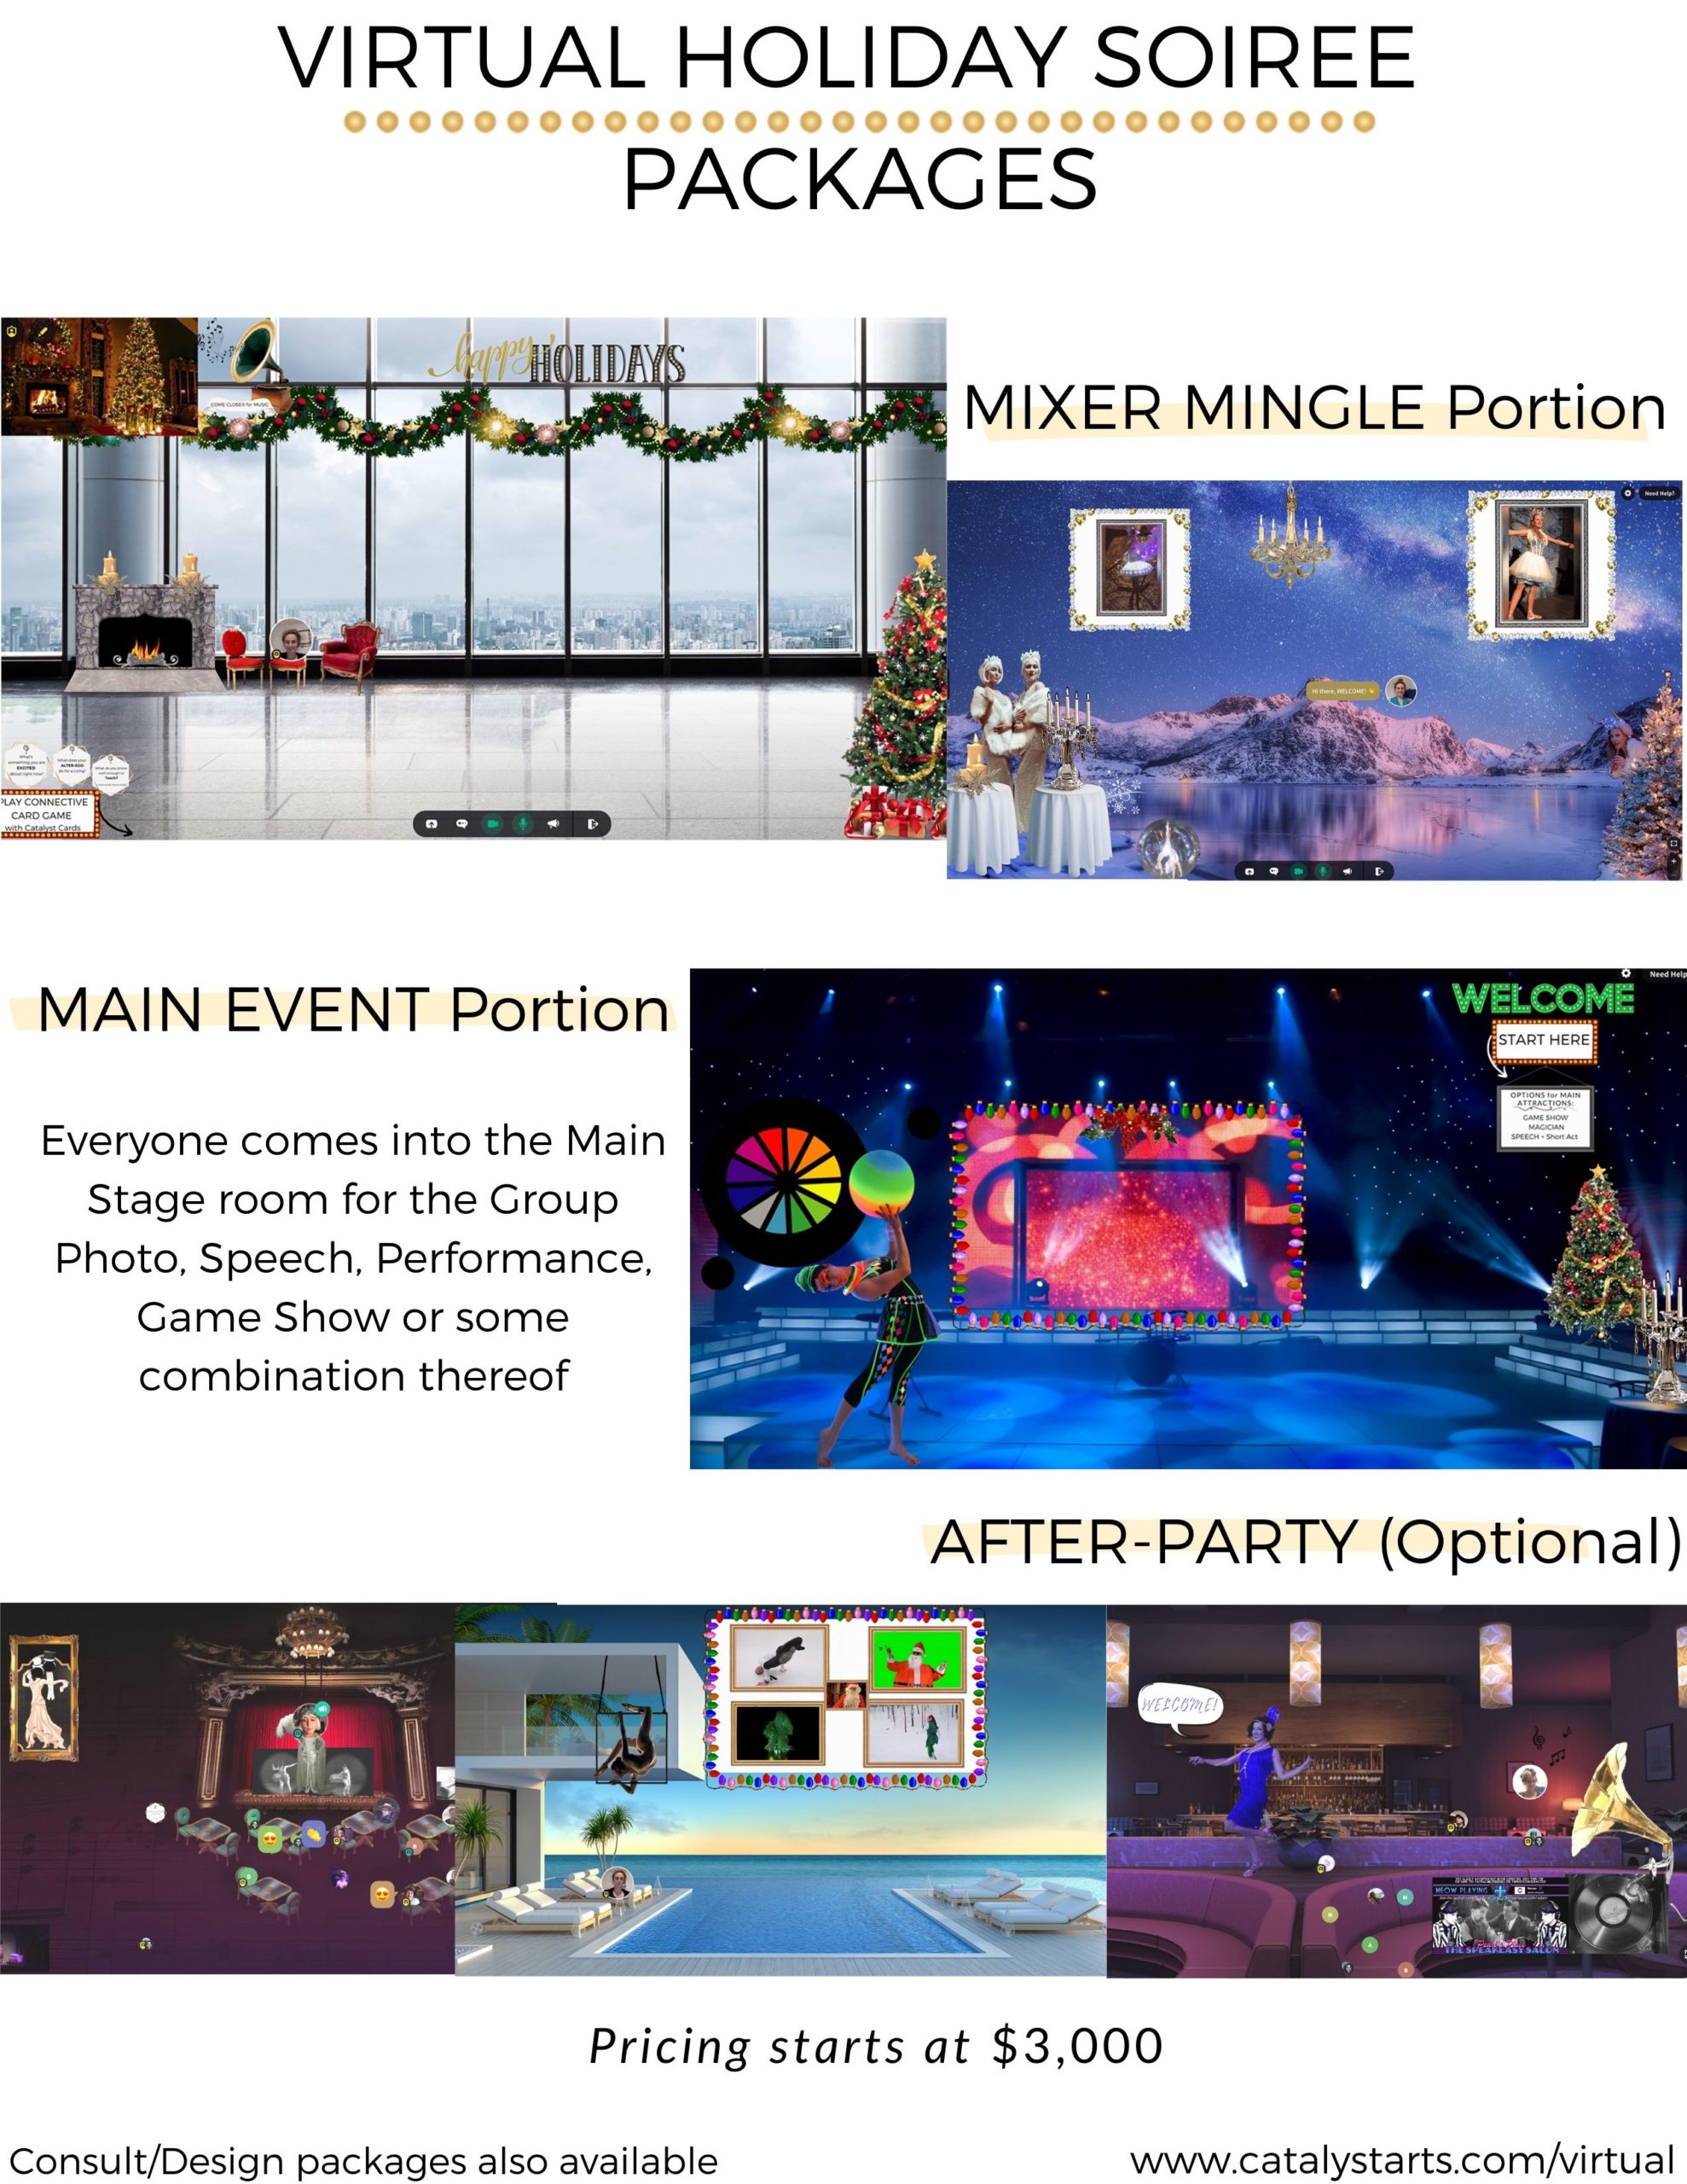 Virtual Holiday Soiree Packages by Catalyst Arts Entertainment